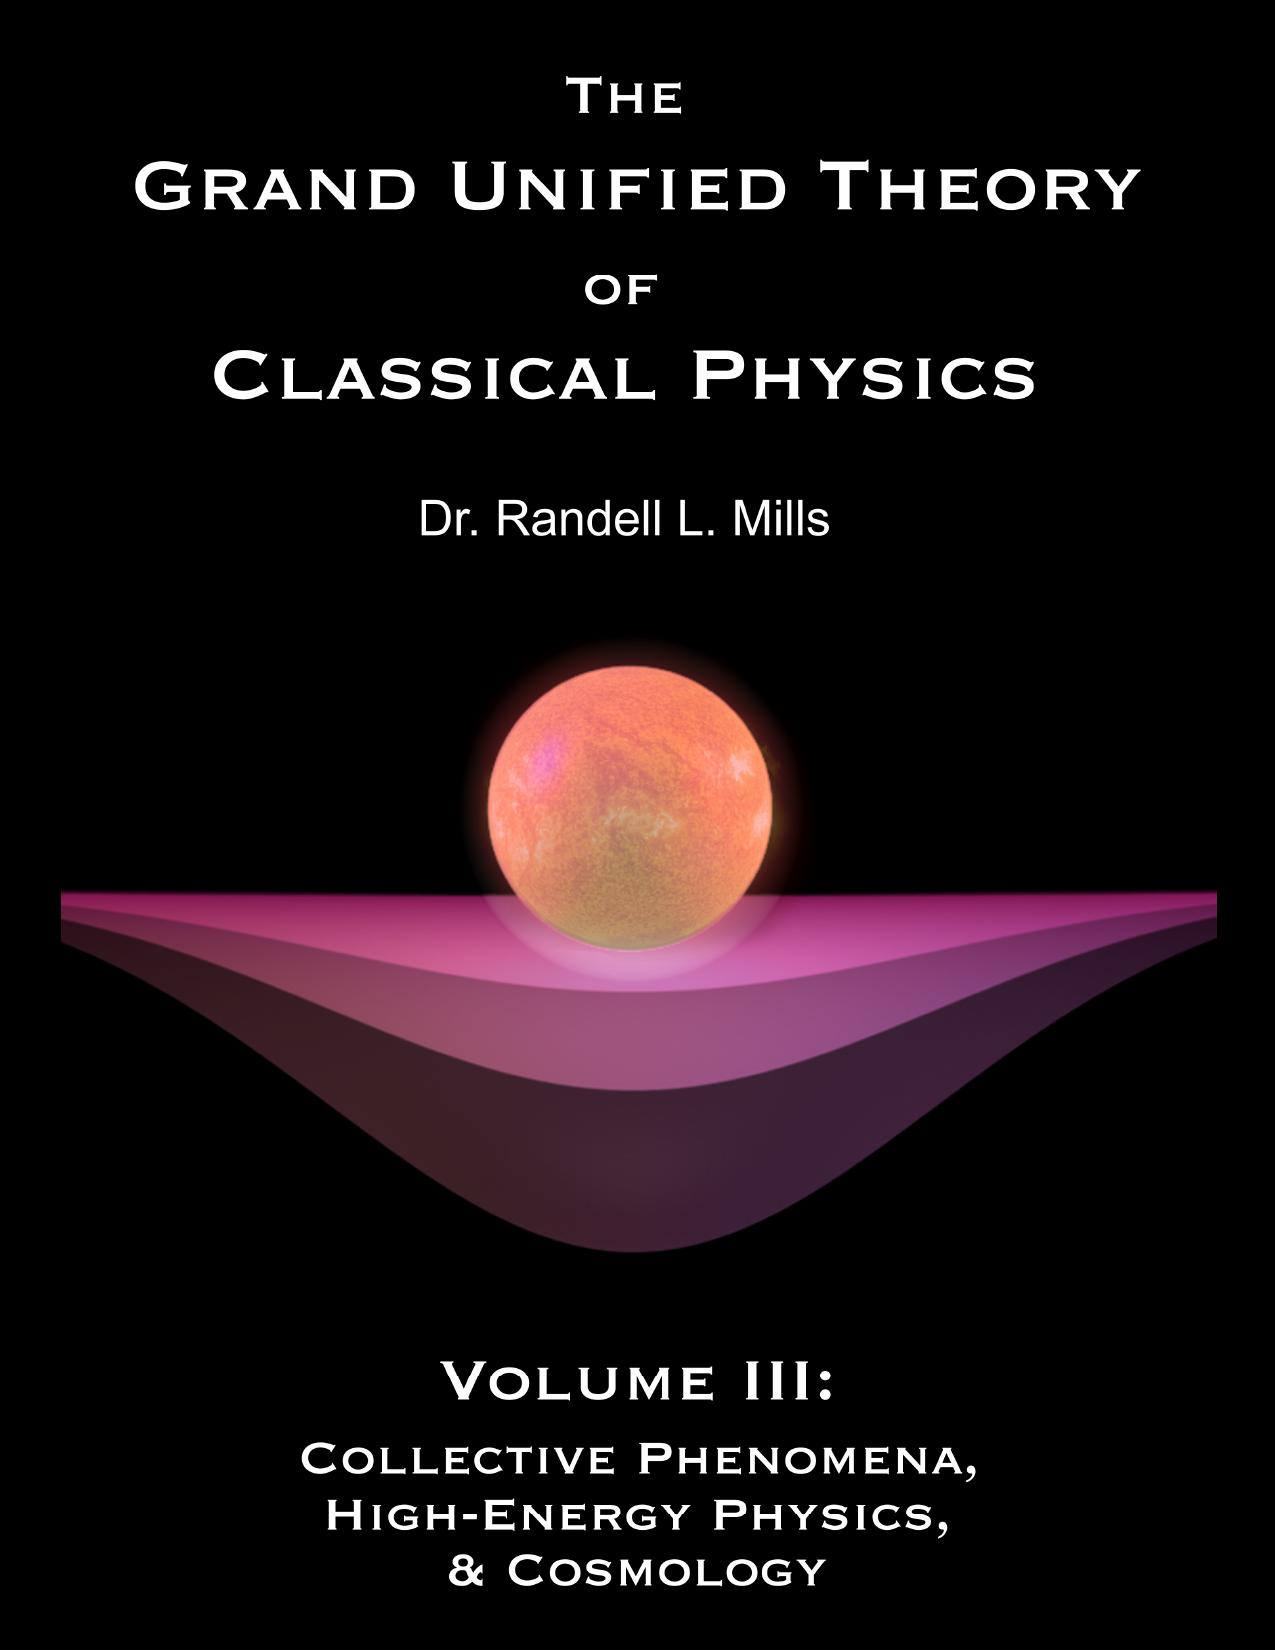 GUT-CP-2016-Ed-Volume3-Web GLAND UNIFIED THEORY OF CLASSICAL PHYSICS 2016